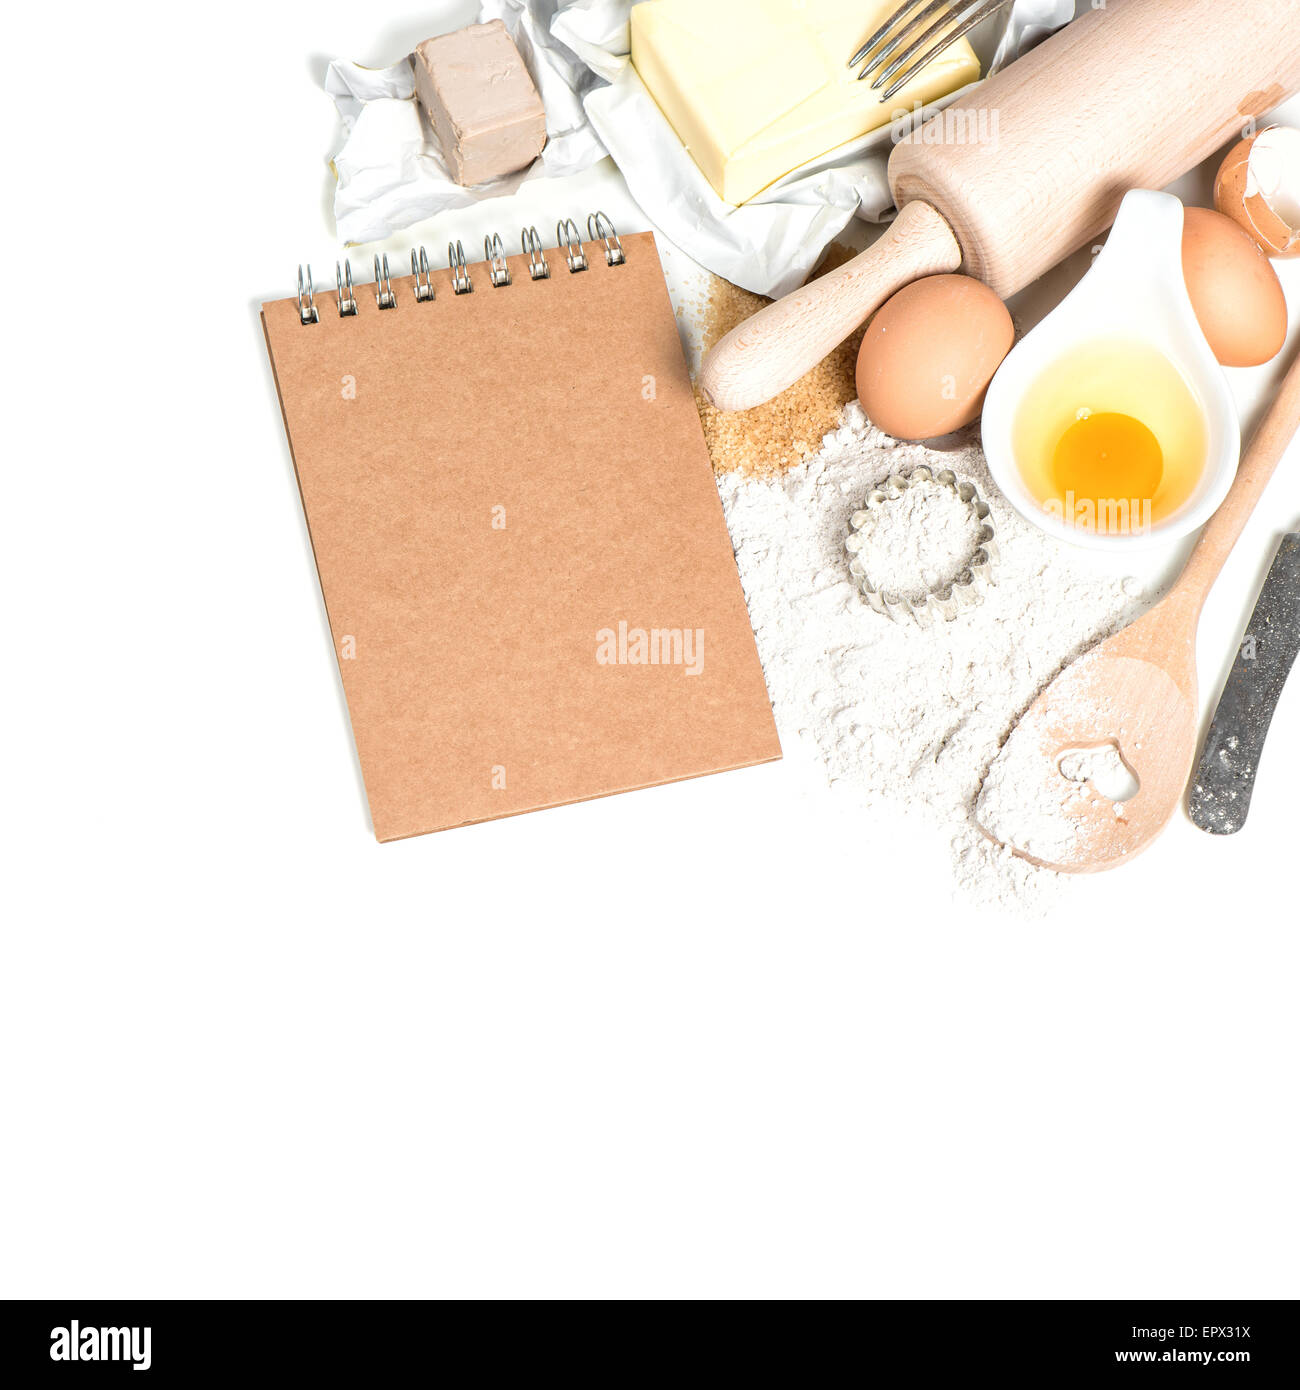 Baking ingredients eggs, flour, sugar, butter, yeast. Food background with recipe book Stock Photo